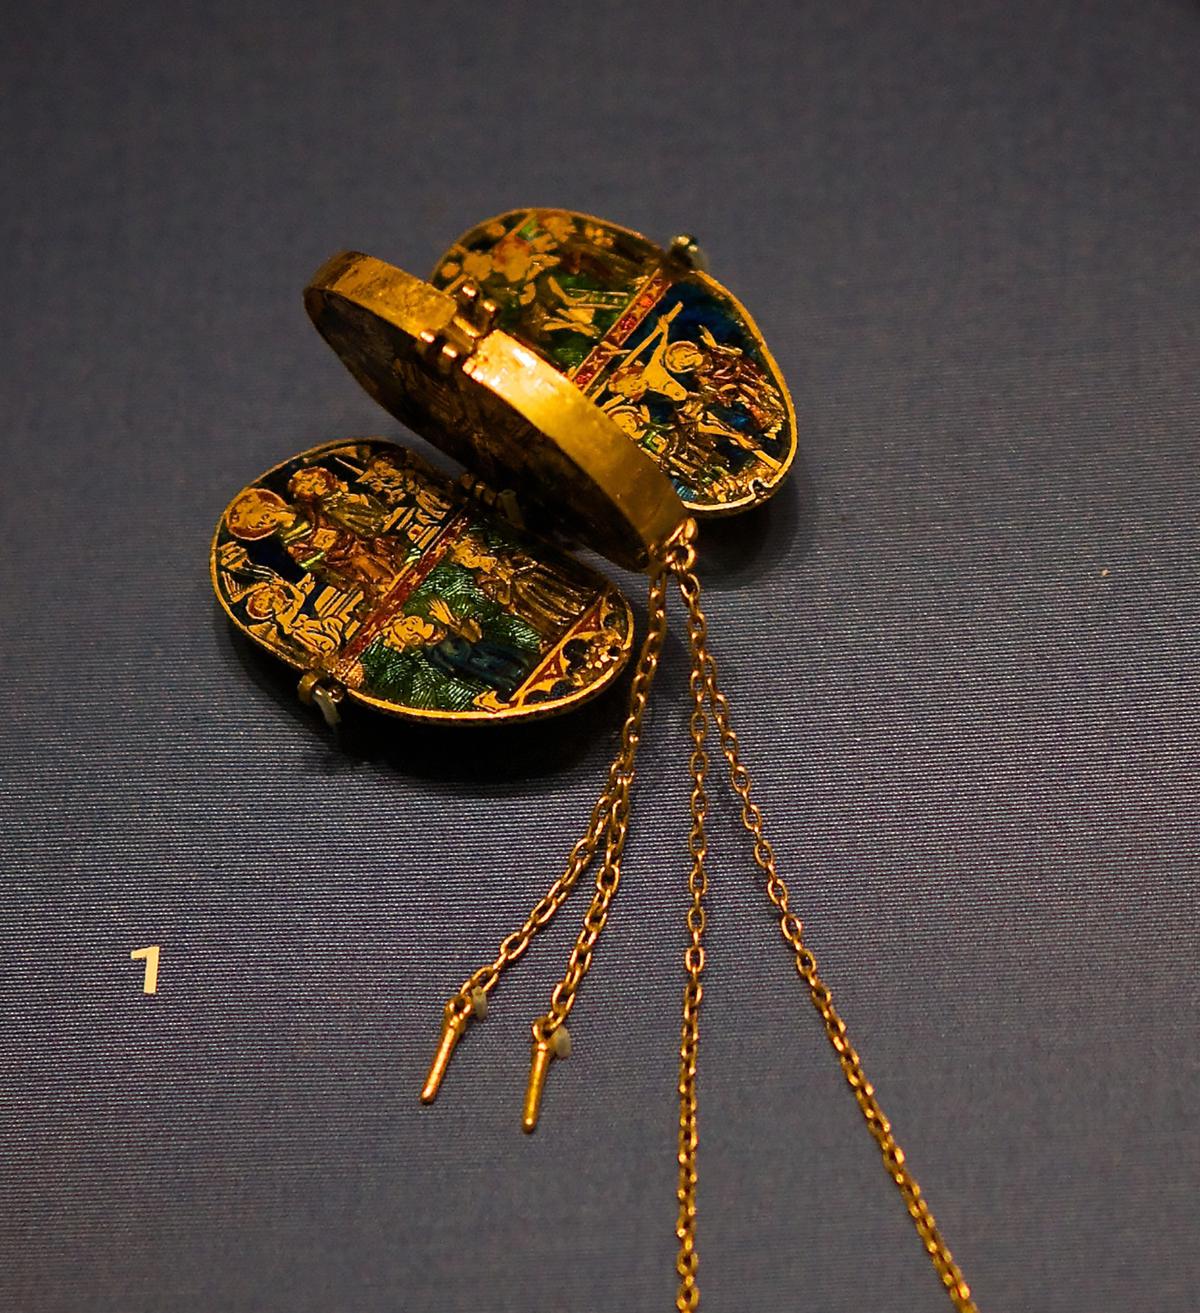 “Reliquary Pendant of the Holy Thorn,” circa 1340. Gold, thorn, amethyst, enamel, and rock crystal, The British Museum, London. (<a href="https://flickr.com/photos/64654599@N00/9077984333">Paul Hudson</a>/<a href="https://creativecommons.org/licenses/by/2.0/">CC BY 2.0</a>)